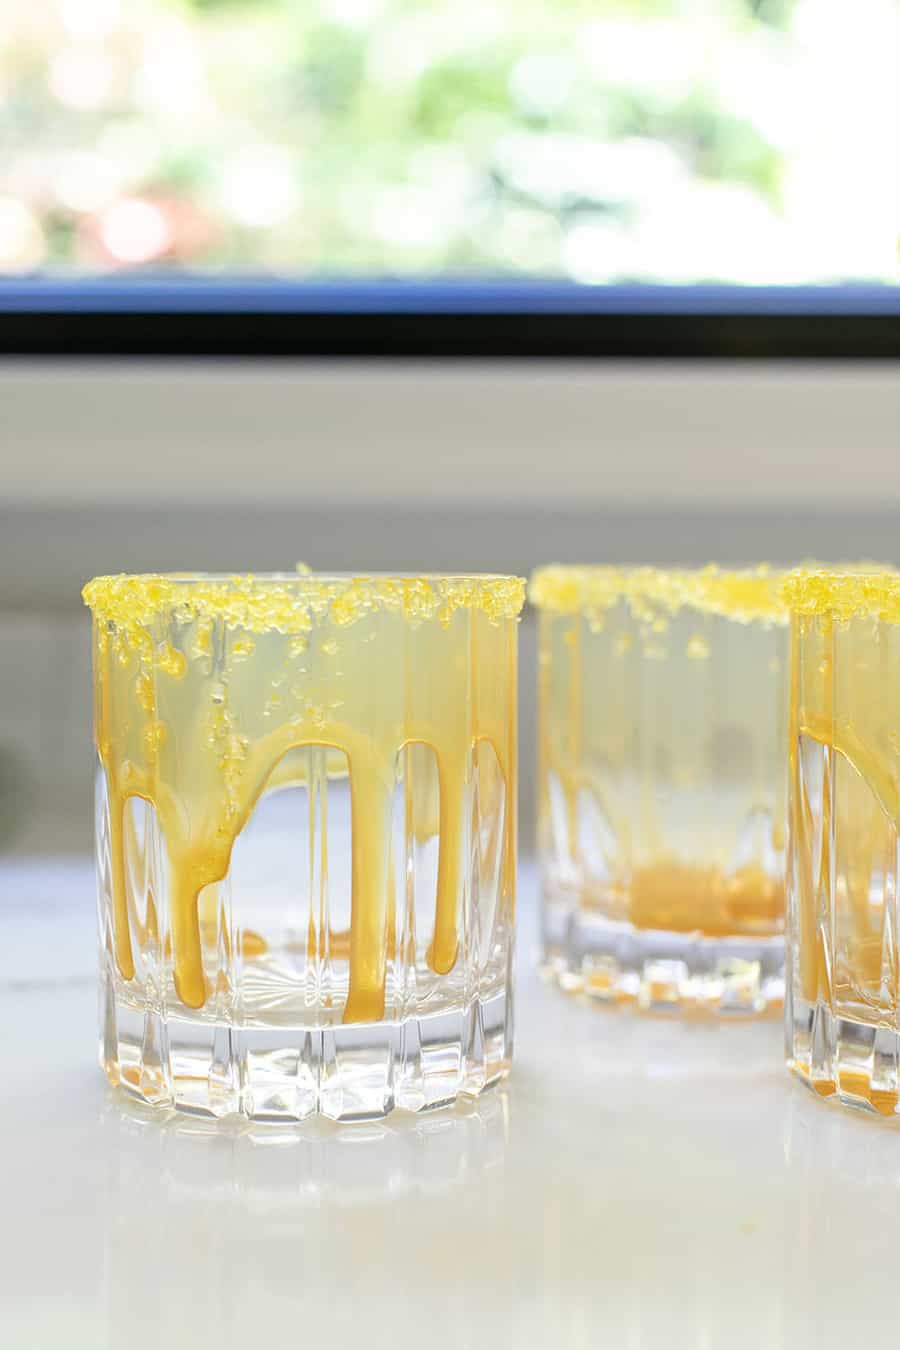 butterscotch sauce dripping down the sides of a glass